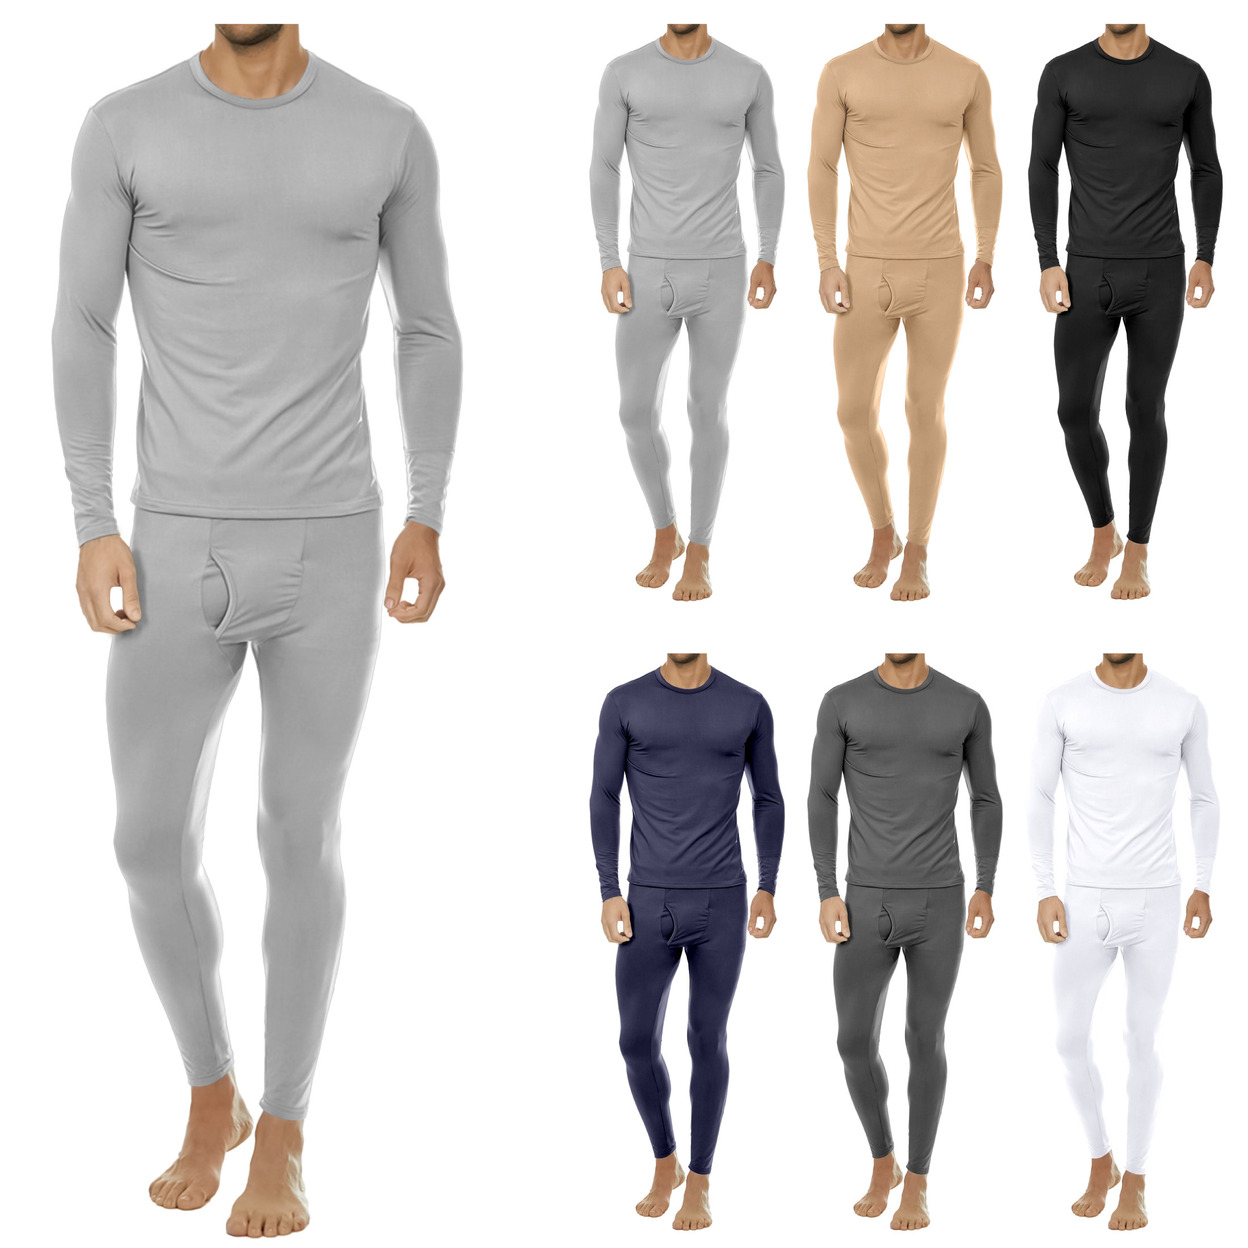 2-Sets: Men's Winter Warm Fleece Lined Thermal Underwear Set For Cold Weather - Grey&grey, Large